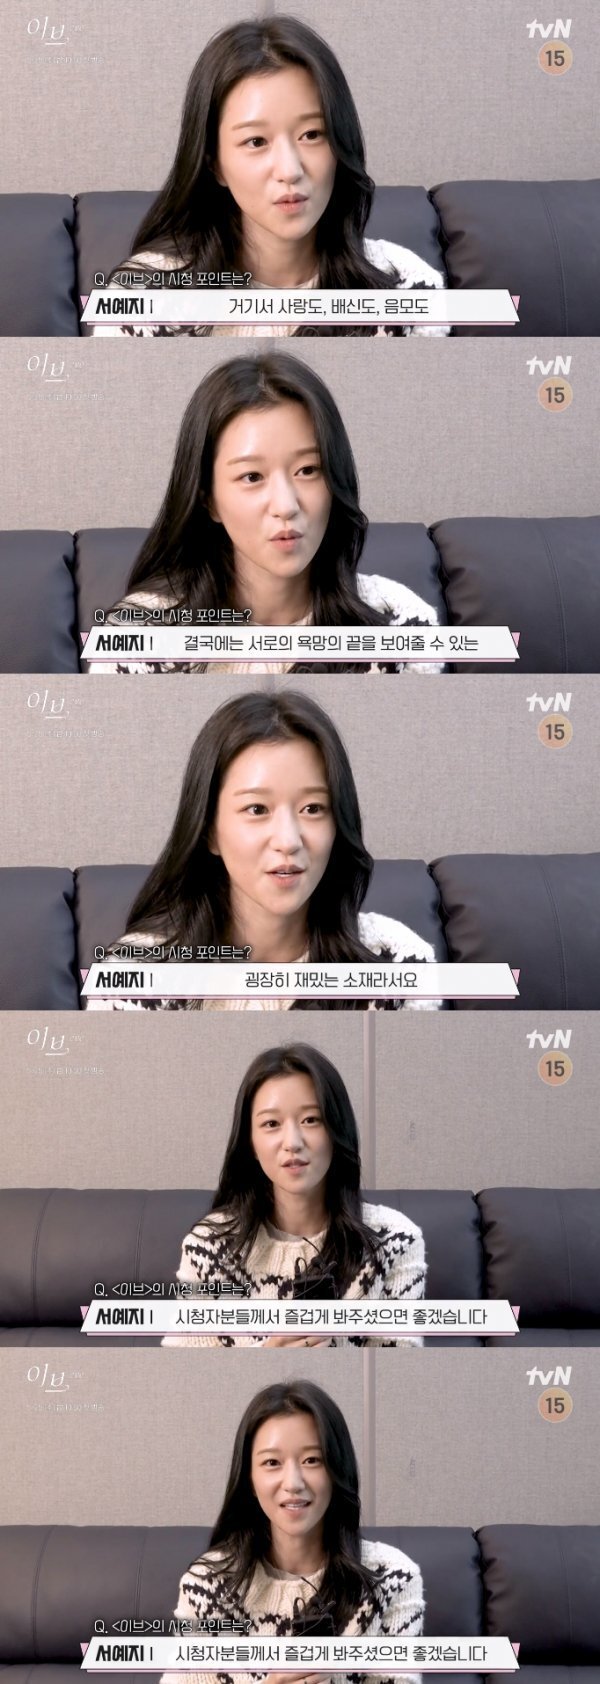 The production team of Eve released a video on the 22nd of the film featuring some of the production machines, some of the script reading sites, and actors who were introduced to Character.Especially in the video, the figure of Seo Ye-ji, who plays the role of the heroine Sean Gelael, attracted attention.In the video, Seo Ye-ji said, Im glad to see you, Seo Ye-ji, who plays the role of Sean Gelael. (Sean Gelael) is deprived of everything in life because of people blind to money.Sean Gelael begins revenge on all walks, and in fact, a lot is entangled at the end of that revenge, he said.There, love, betrayal, and conspiracy eventually show each others desires. (This work) deals with very interesting materials. I hope viewers will enjoy it. Eve is a 13-year design, life-stricken revenge, a revenge drama featuring the most intense and deadly high-quality passion melodies that will bring down 0.1 percent of South Korea.Therefore, there are many eyes toward the return of Seo Ye-ji, who plays the heroine rather than the work itself.Thats what he did last year, too, Seo Ye-ji was named the person behind Kim Jung-hyuns drop-off in the 2018 drama Time.It is said that Seo Ye-ji forced his lover Kim Jung-hyun to act hard toward his opponent.But both Seo Ye-ji and Kim Jung-hyeun denied the rumors and allegations involved, only admitting that they were dating.Kim Jung-hyun also emphasized that getting off time is a health reason.The Gold medalist explained that the previous remarks and actions that he was from a prestigious Spanish university were due to his former agency.Although he was admitted to the prestigious university, he did not attend the school. He also said he had confirmed his pass.However, the pass was not disclosed as an explanation.And then Seo Ye-ji chose to distancing himself from the public for a while, a calculation that would keep him in the dark until the controversy and suspicions were quiet.And when the story about the Eve formation began to emerge, I apologized in February.Seo Ye-ji said through his agency Gold Medalist, I am sincerely sorry to convey my heart too late.I have had time to look back at myself, seeing the rebukes and stories I have given me, and I am sincerely sorry that my lack has caused many people to feel sorry for me.I apologize again for the many disappointments. Everything is from my immaturity.I will try to be more careful and mature in the future, he said.What will Seo Ye-ji tell in the official appearance (Eve production presentation)? It is noteworthy that Seo Ye-ji and his company Gold medalists return plan (plan) will fit.